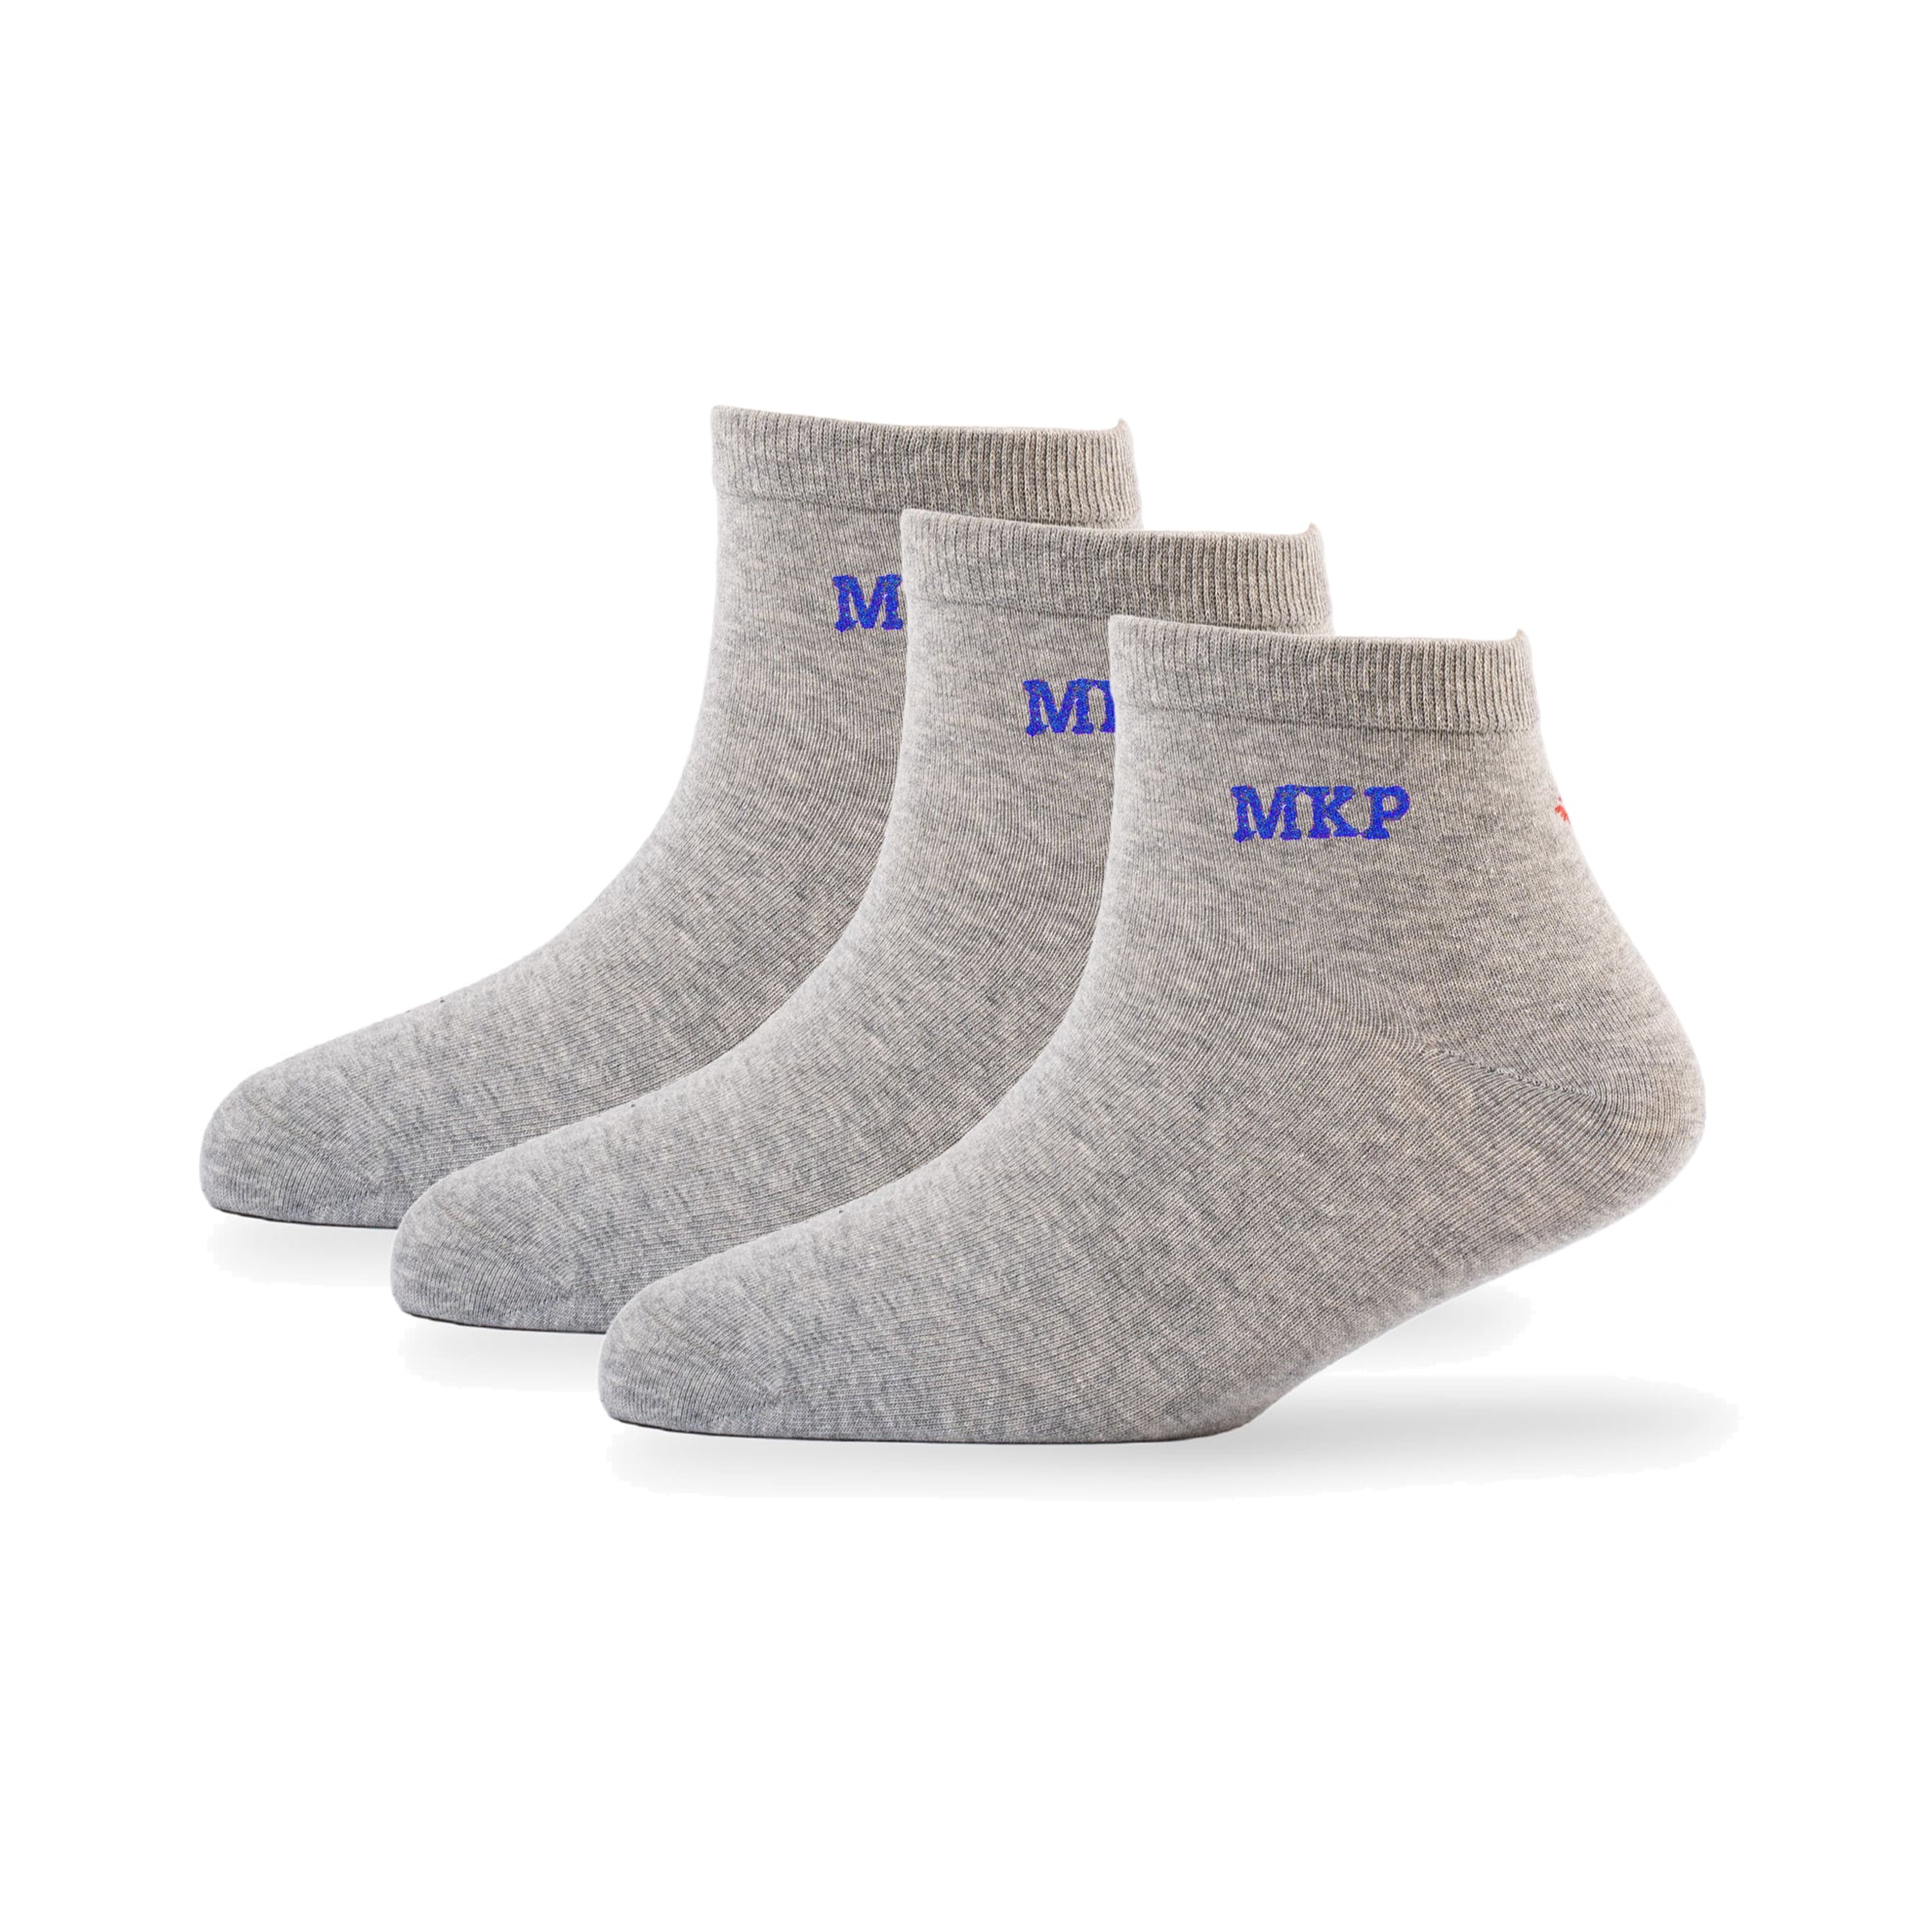 Young Wings Men's Monogram Ankle Length Socks, Colour Light Grey Melange - Pack of 3 Pairs, Style no. 2595-M3